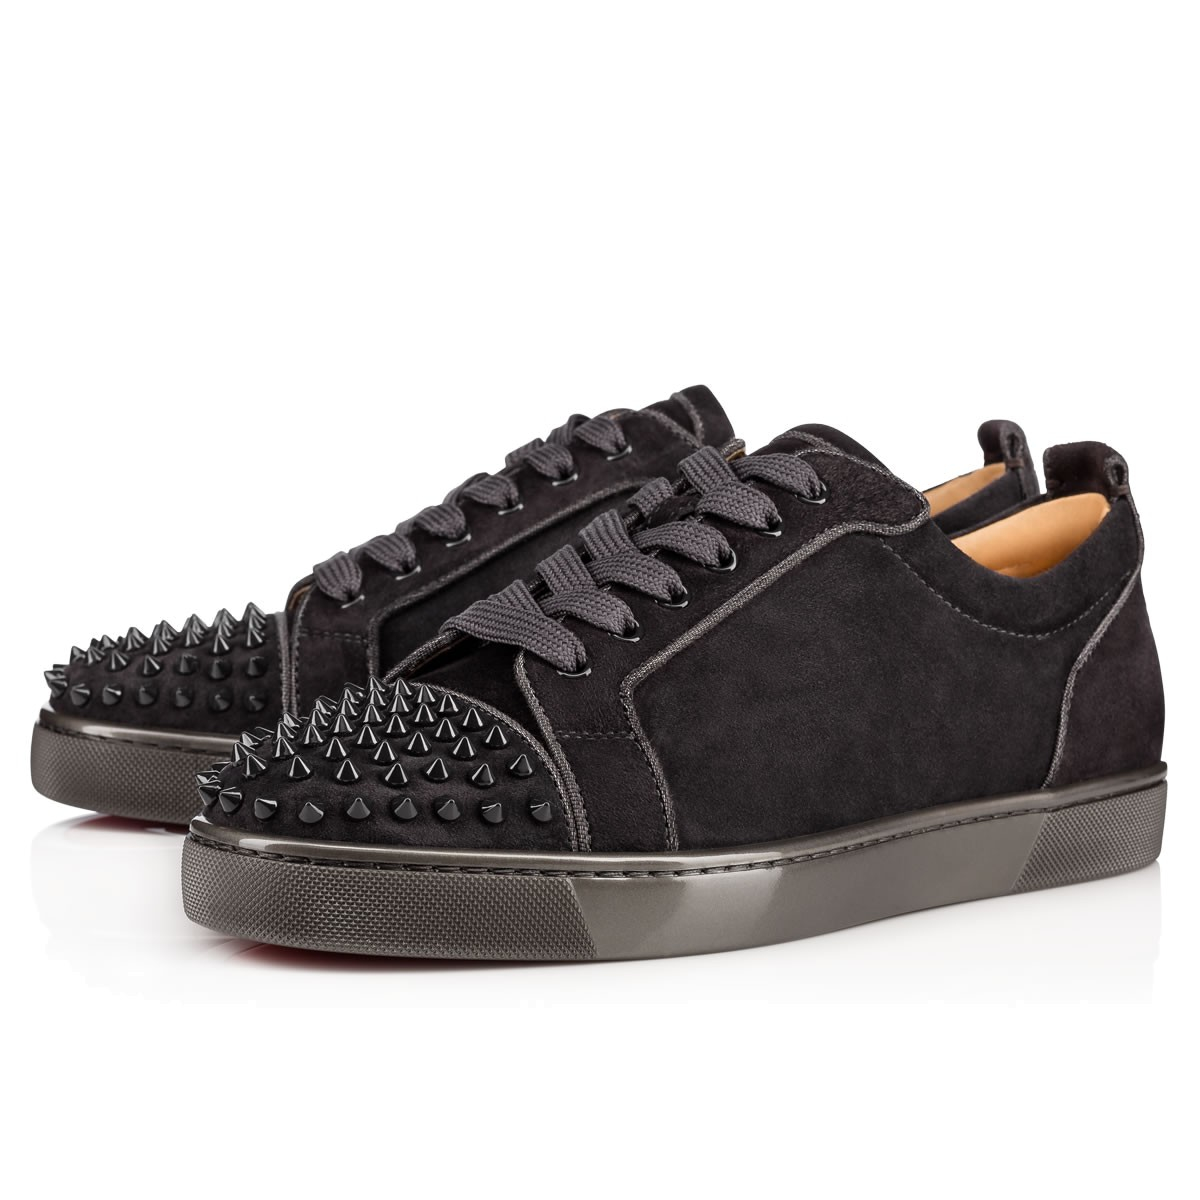 Lyst - Christian Louboutin Louis Junior Spikes Orlato Flat Suede Sneakers in Black for Men